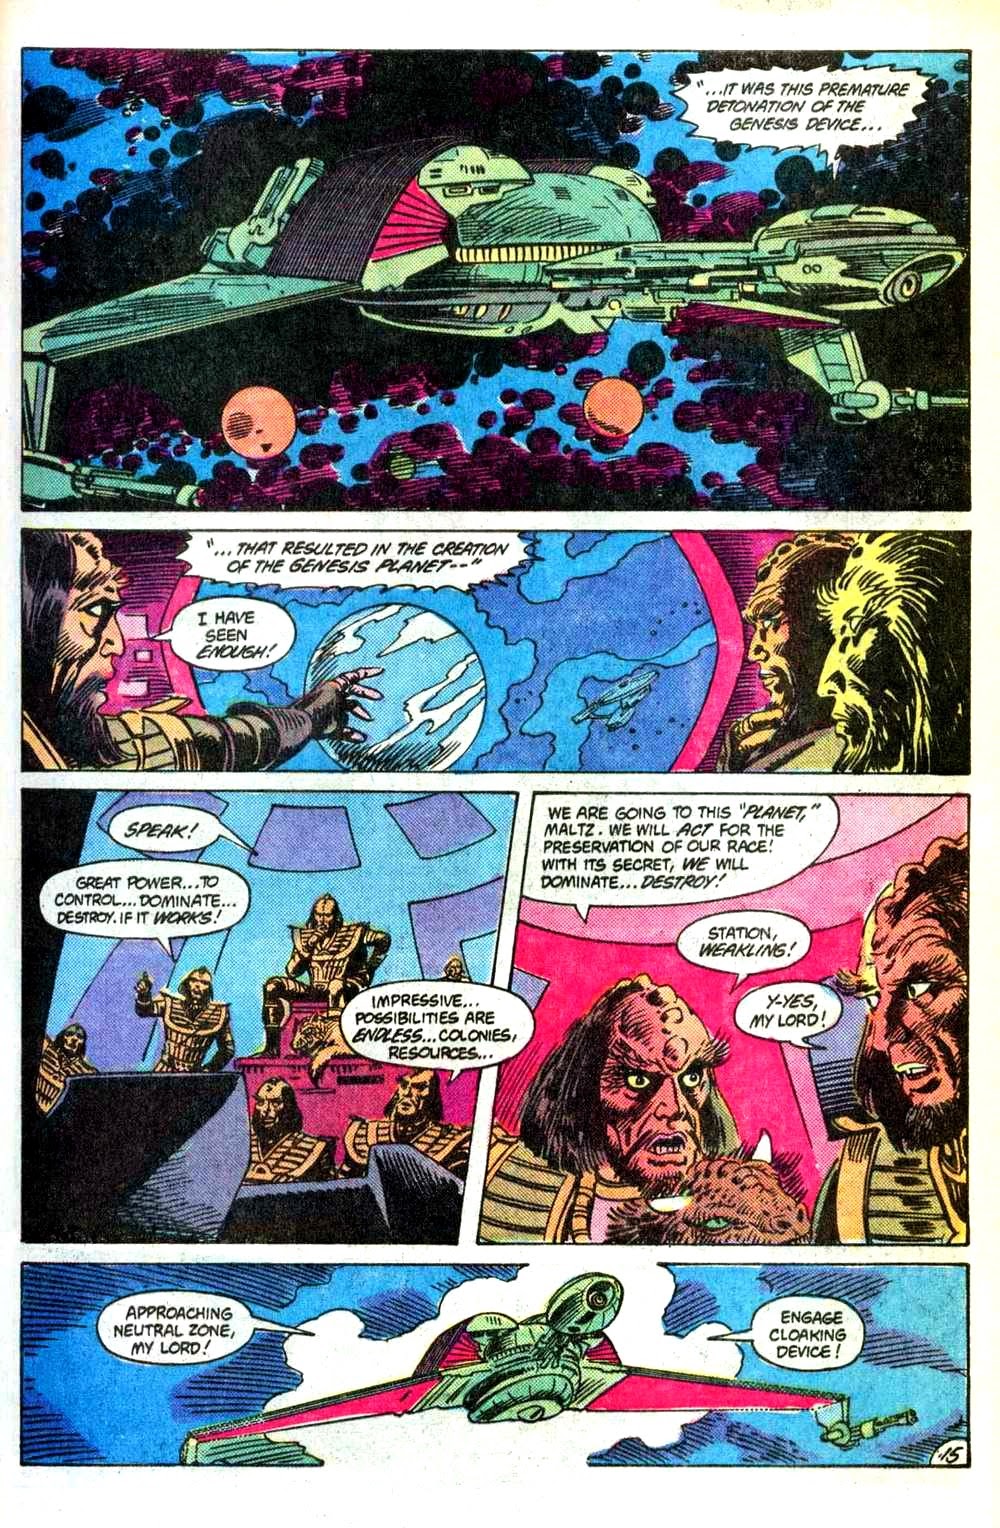 Read online Star Trek III: The Search for Spock comic -  Issue # Full - 17